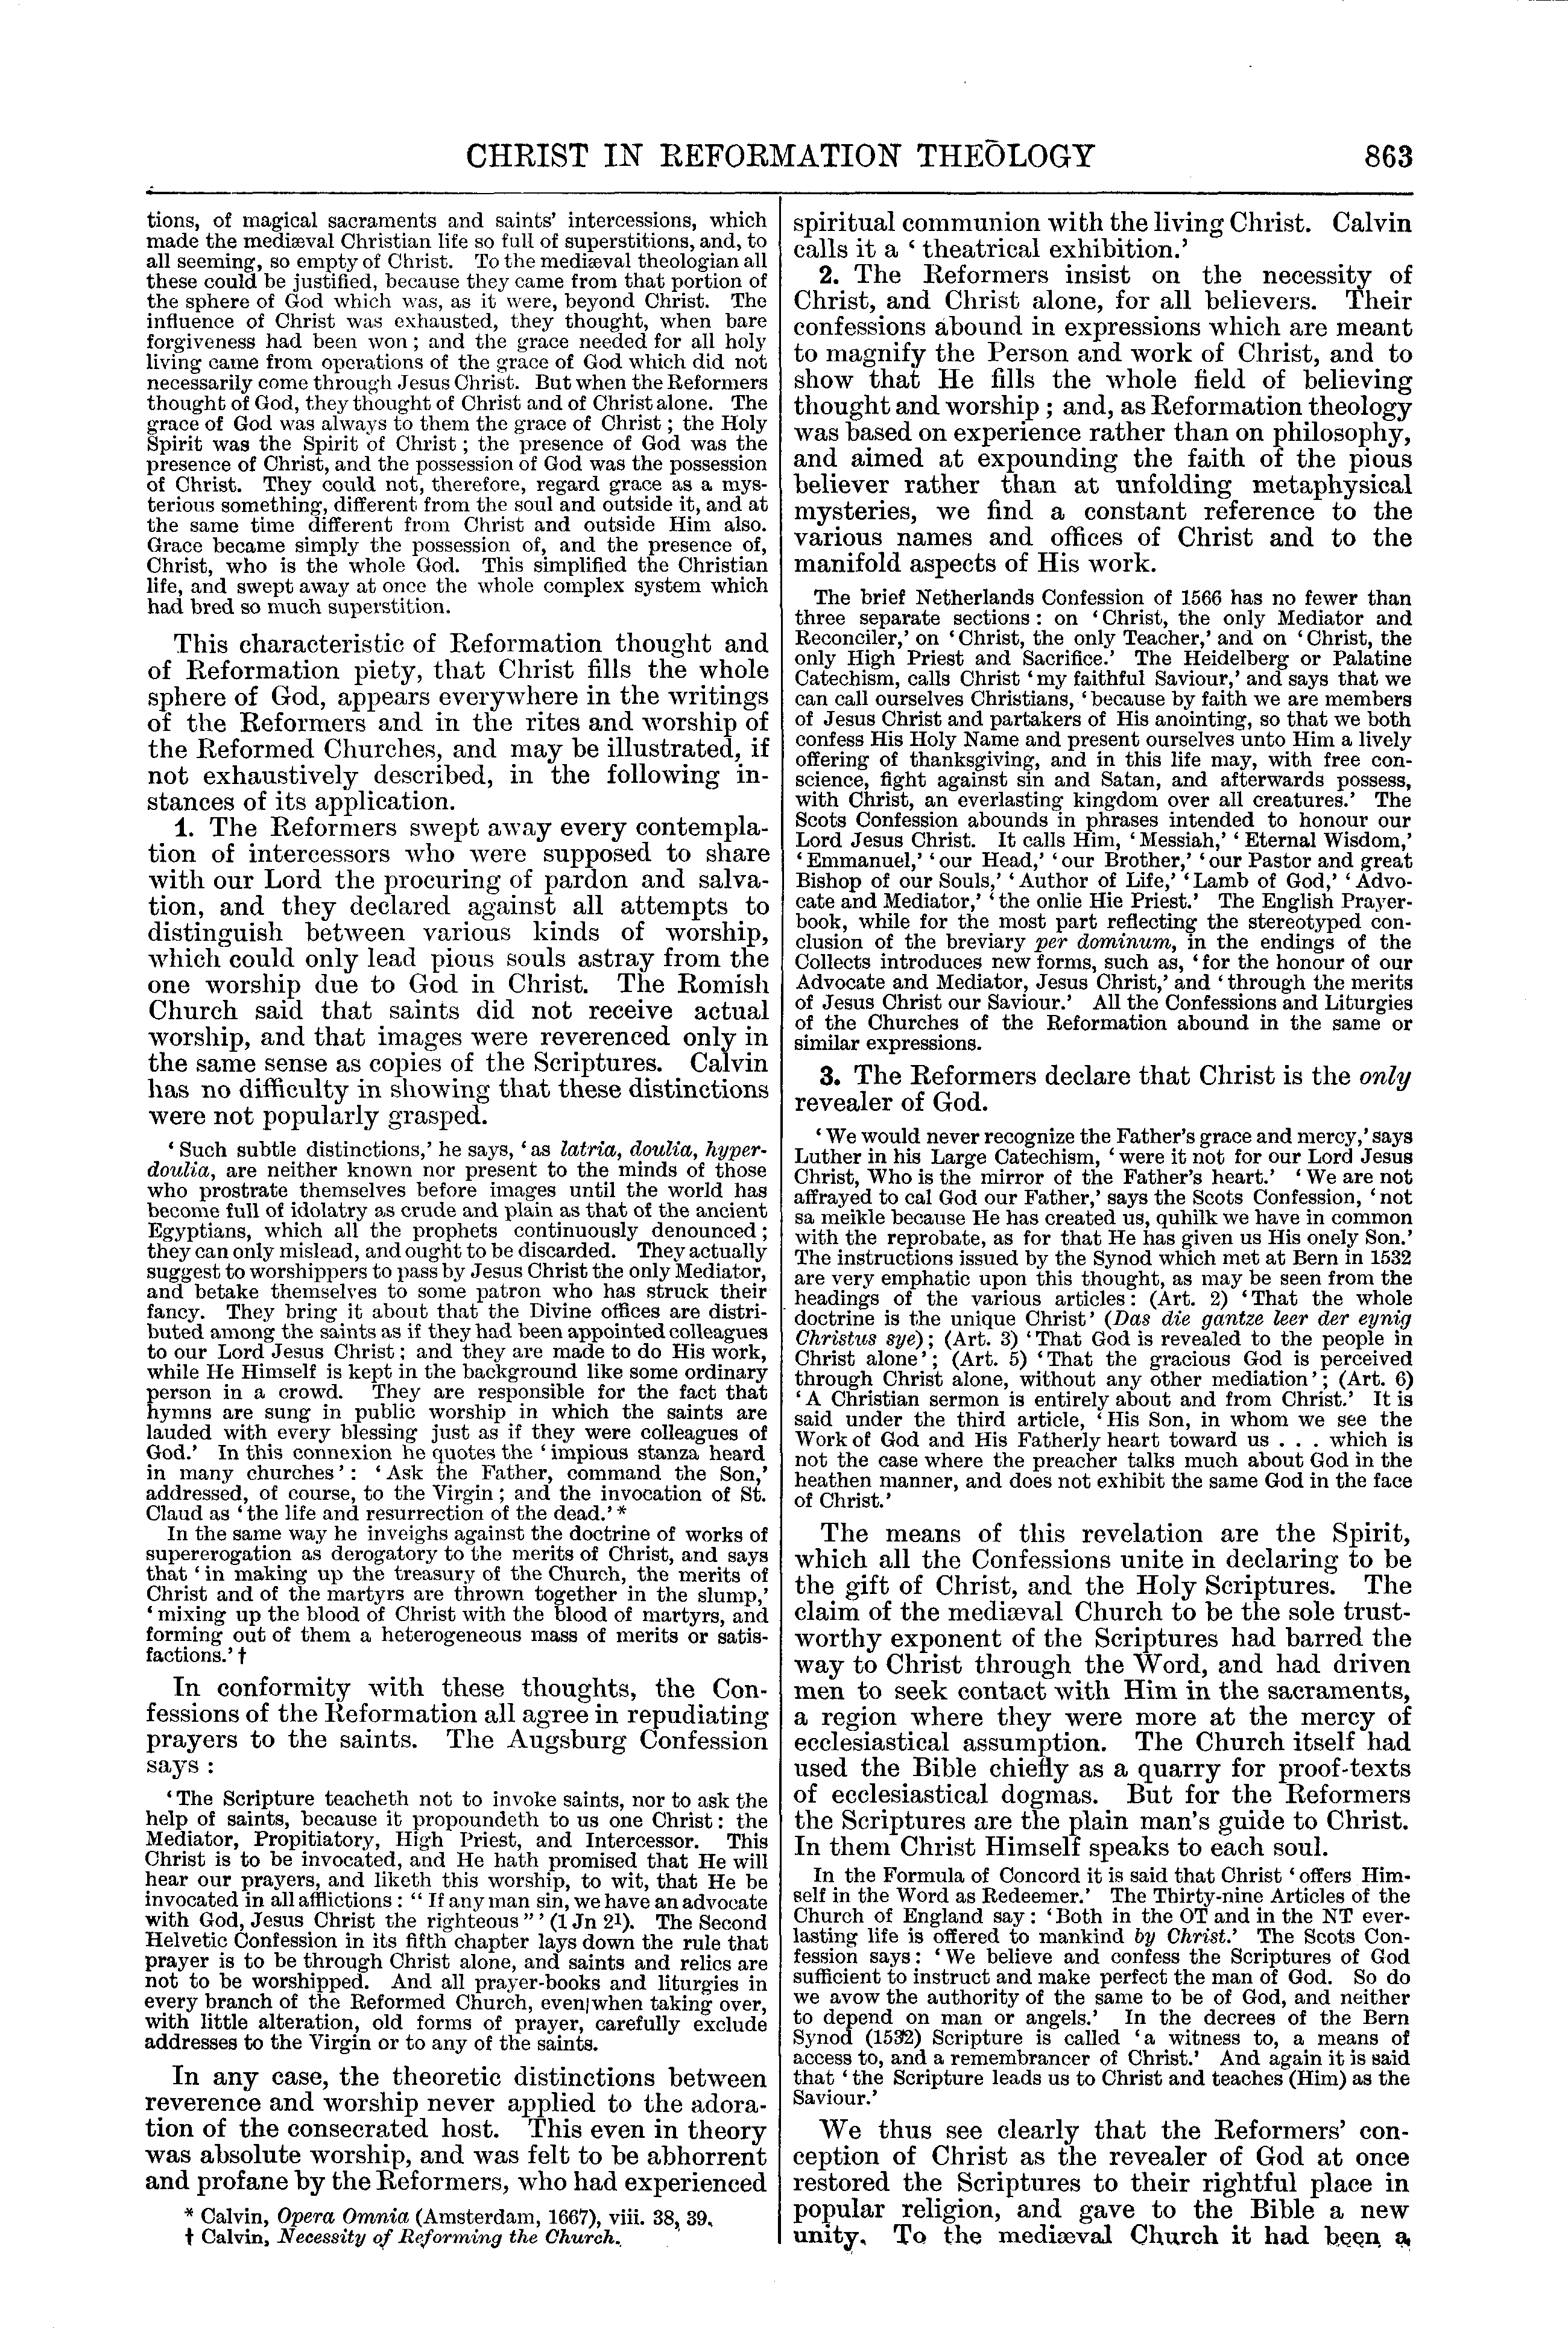 Image of page 863